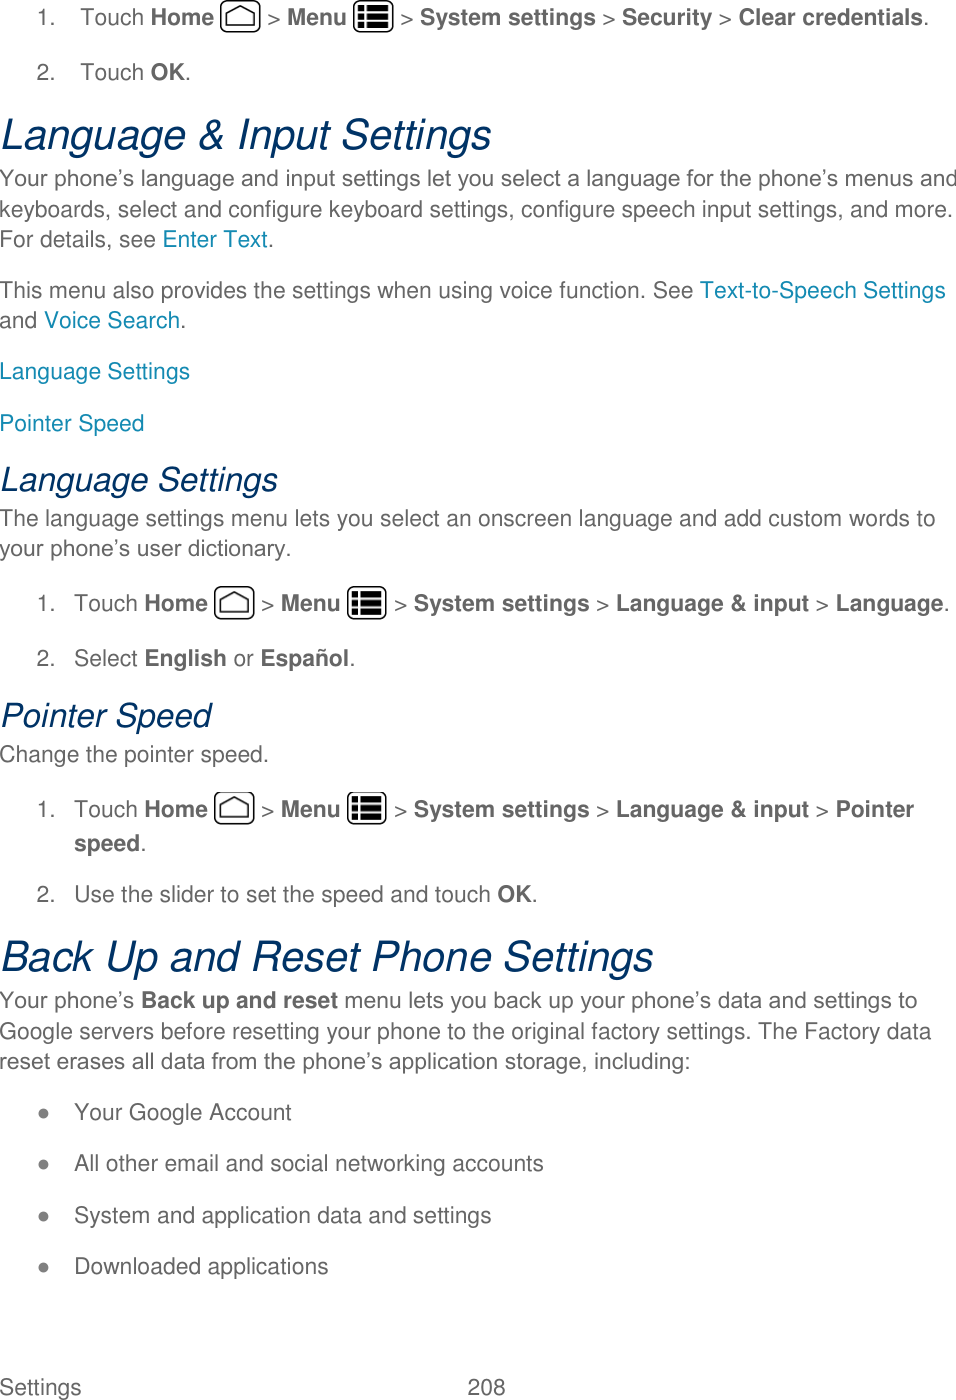 Settings    208 1.  Touch Home   &gt; Menu   &gt; System settings &gt; Security &gt; Clear credentials. 2.  Touch OK. Language &amp; Input Settings Your phone’s language and input settings let you select a language for the phone’s menus and keyboards, select and configure keyboard settings, configure speech input settings, and more. For details, see Enter Text.   This menu also provides the settings when using voice function. See Text-to-Speech Settings and Voice Search. Language Settings Pointer Speed Language Settings The language settings menu lets you select an onscreen language and add custom words to your phone’s user dictionary. 1.  Touch Home   &gt; Menu   &gt; System settings &gt; Language &amp; input &gt; Language. 2.  Select English or Español. Pointer Speed Change the pointer speed. 1.  Touch Home   &gt; Menu   &gt; System settings &gt; Language &amp; input &gt; Pointer speed. 2.  Use the slider to set the speed and touch OK. Back Up and Reset Phone Settings Your phone’s Back up and reset menu lets you back up your phone’s data and settings to Google servers before resetting your phone to the original factory settings. The Factory data reset erases all data from the phone’s application storage, including: ● Your Google Account ● All other email and social networking accounts ● System and application data and settings ● Downloaded applications 